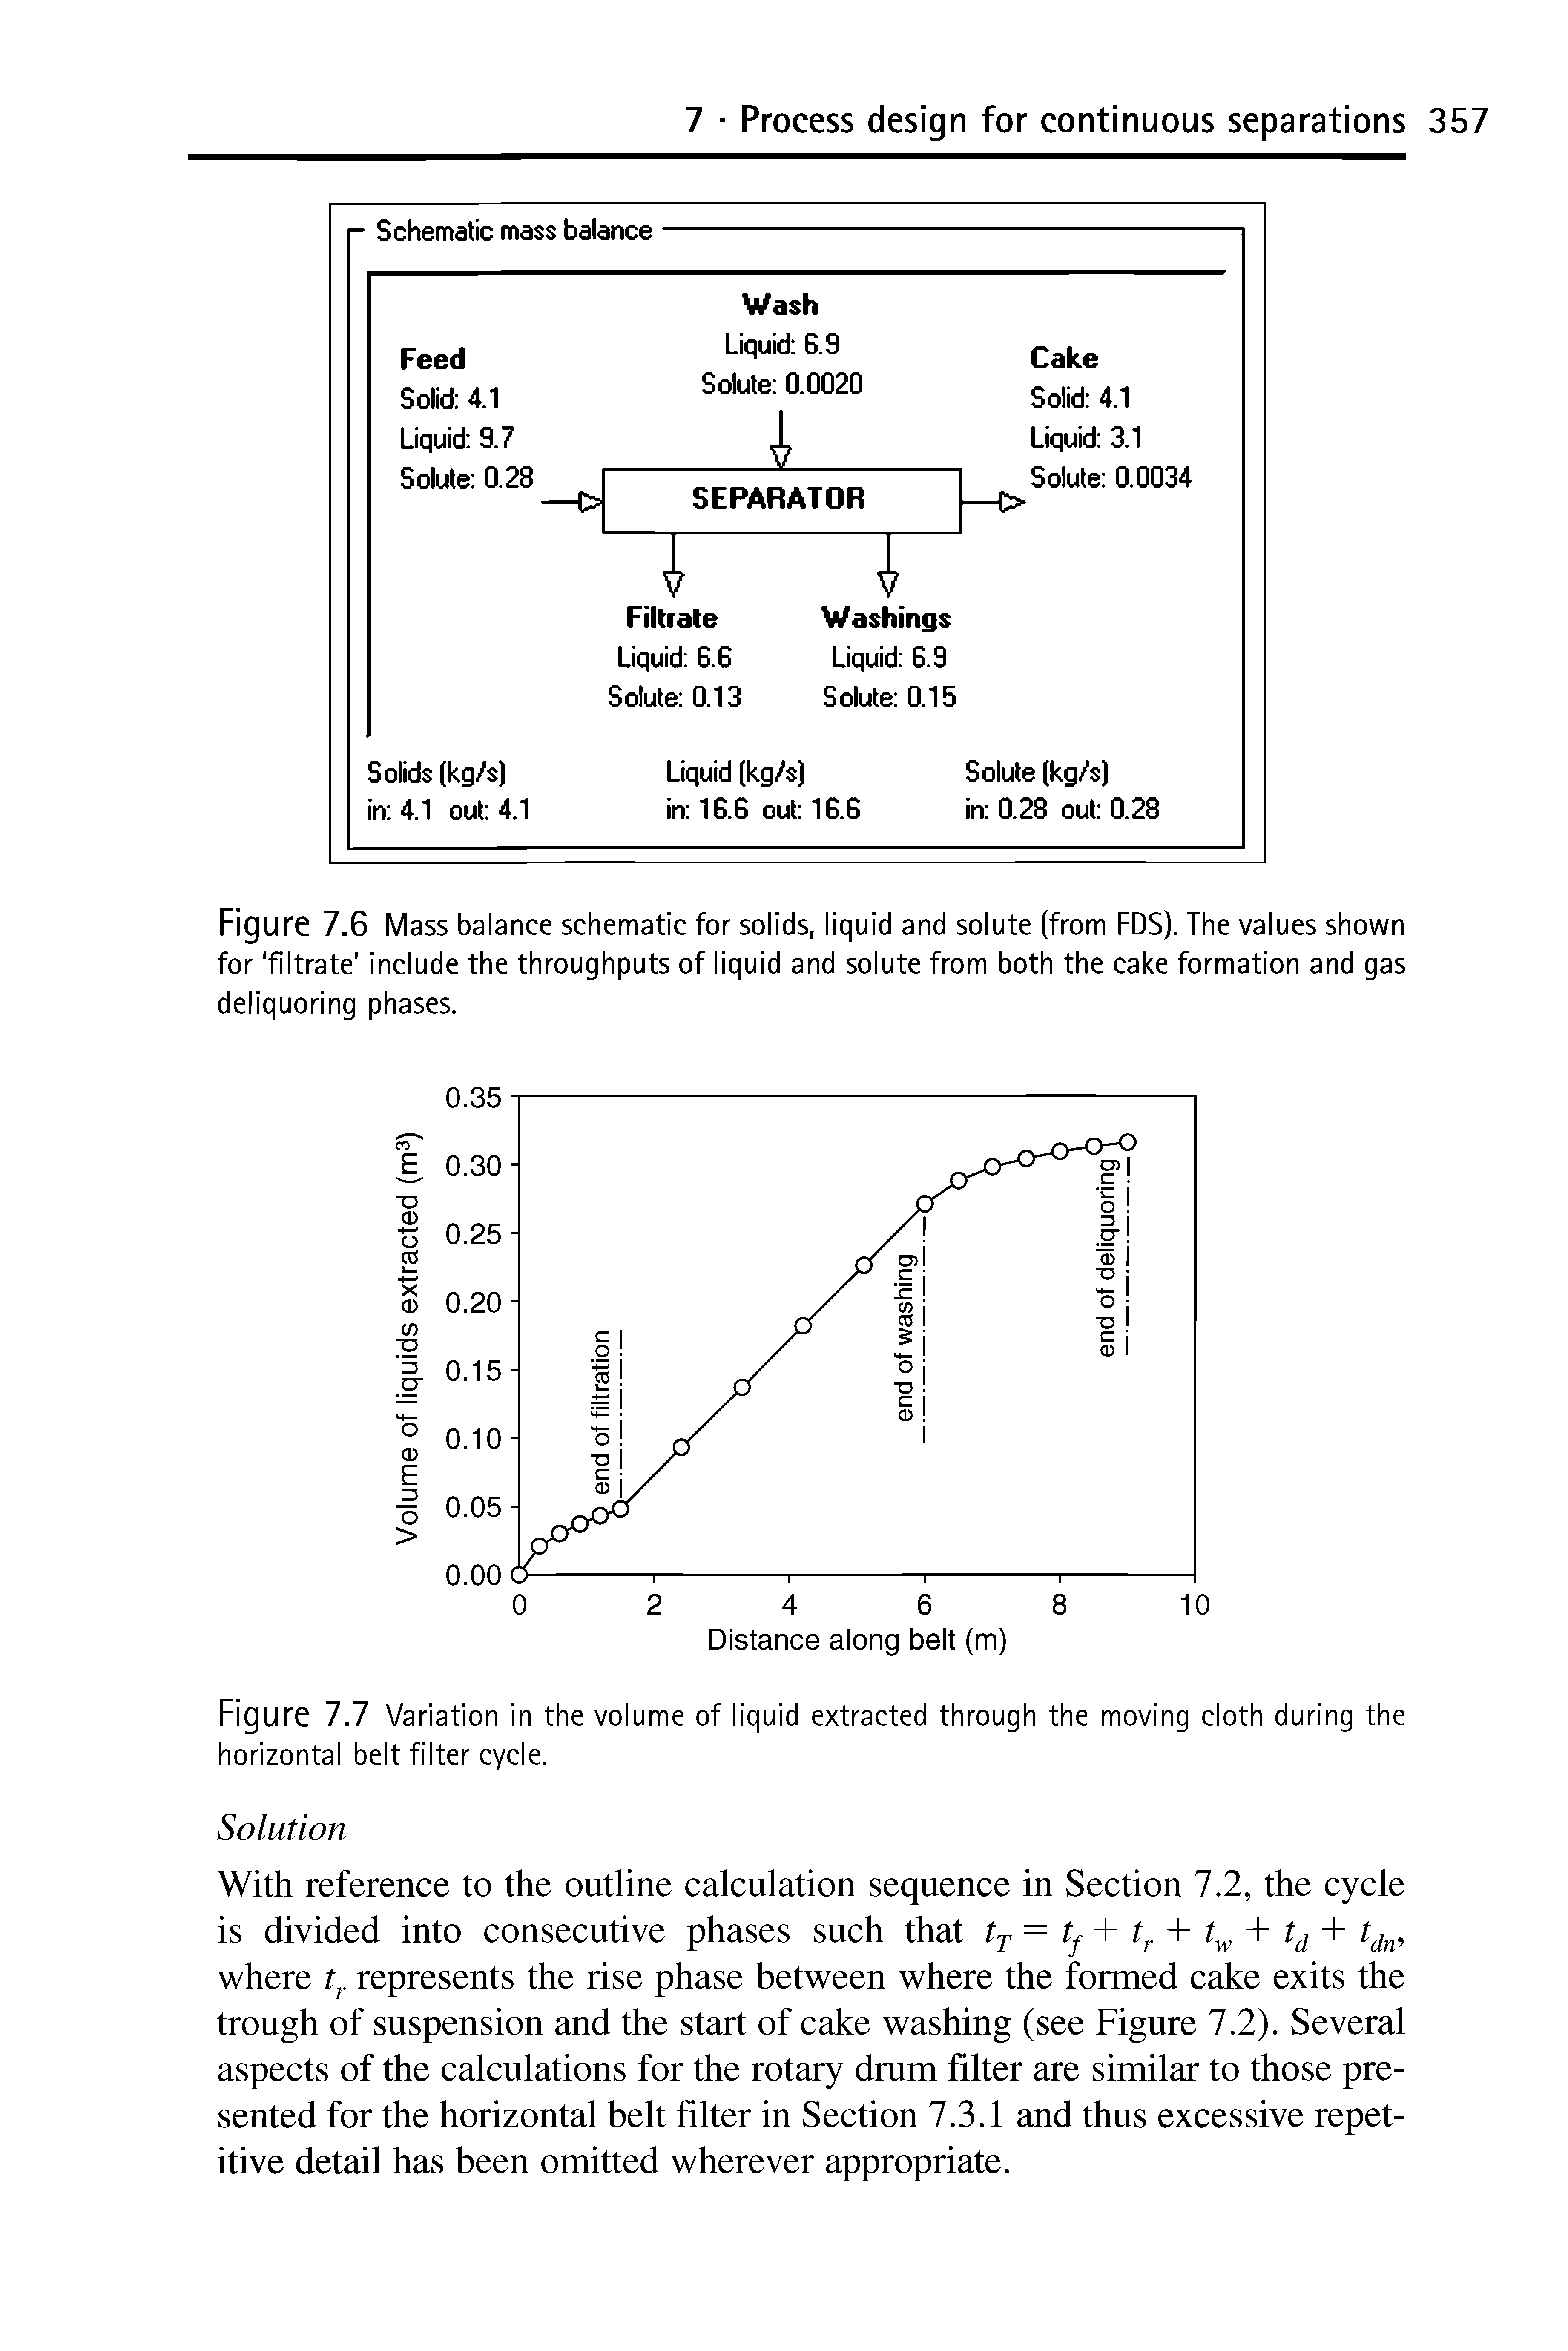 Figure 7.6 Mass balance schematic for solids, liquid and solute (from FDS). The values shown for filtrate include the throughputs of liquid and solute from both the cake formation and gas deliquoring phases.